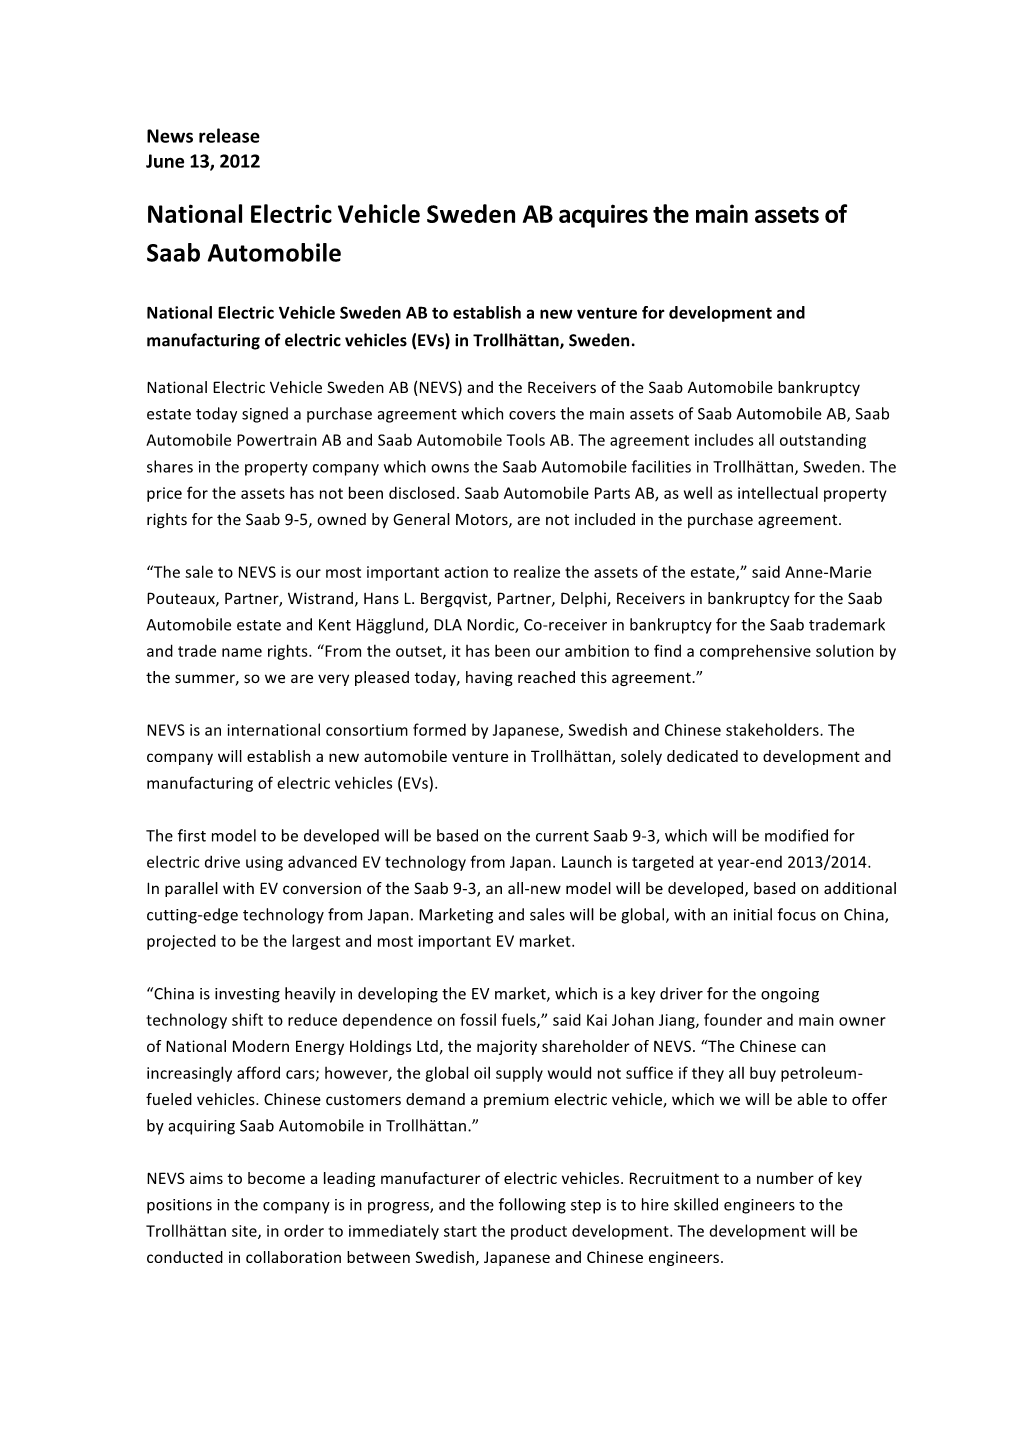 News Release National Electric Vehicle Sweden AB Acquires The